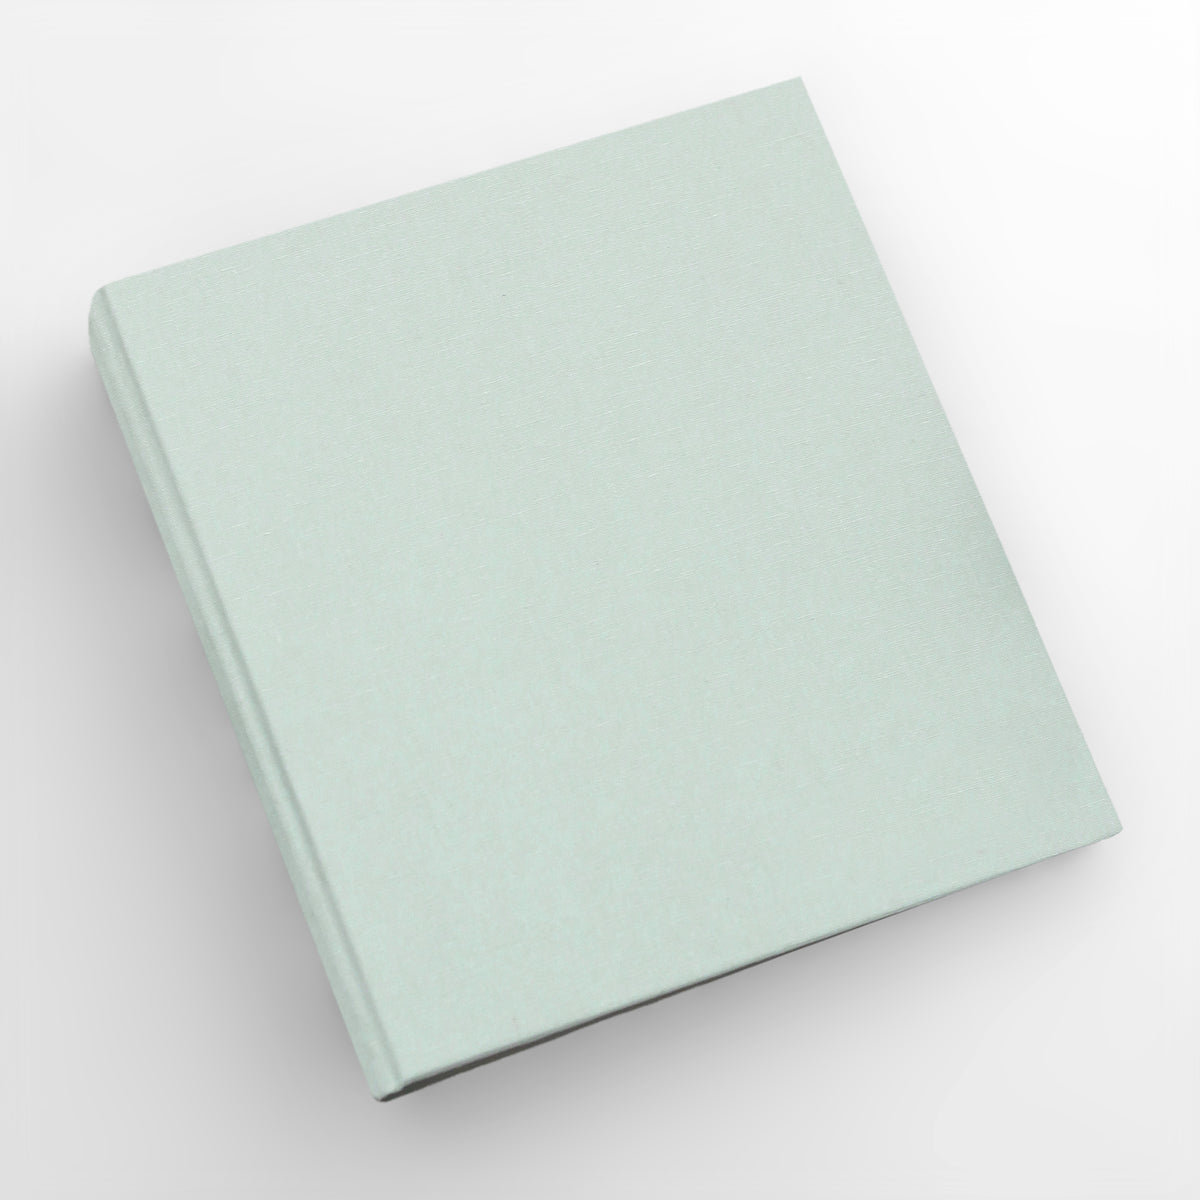 Photo Binder (for 5x7 photos) with Pastel Blue Cotton Cover